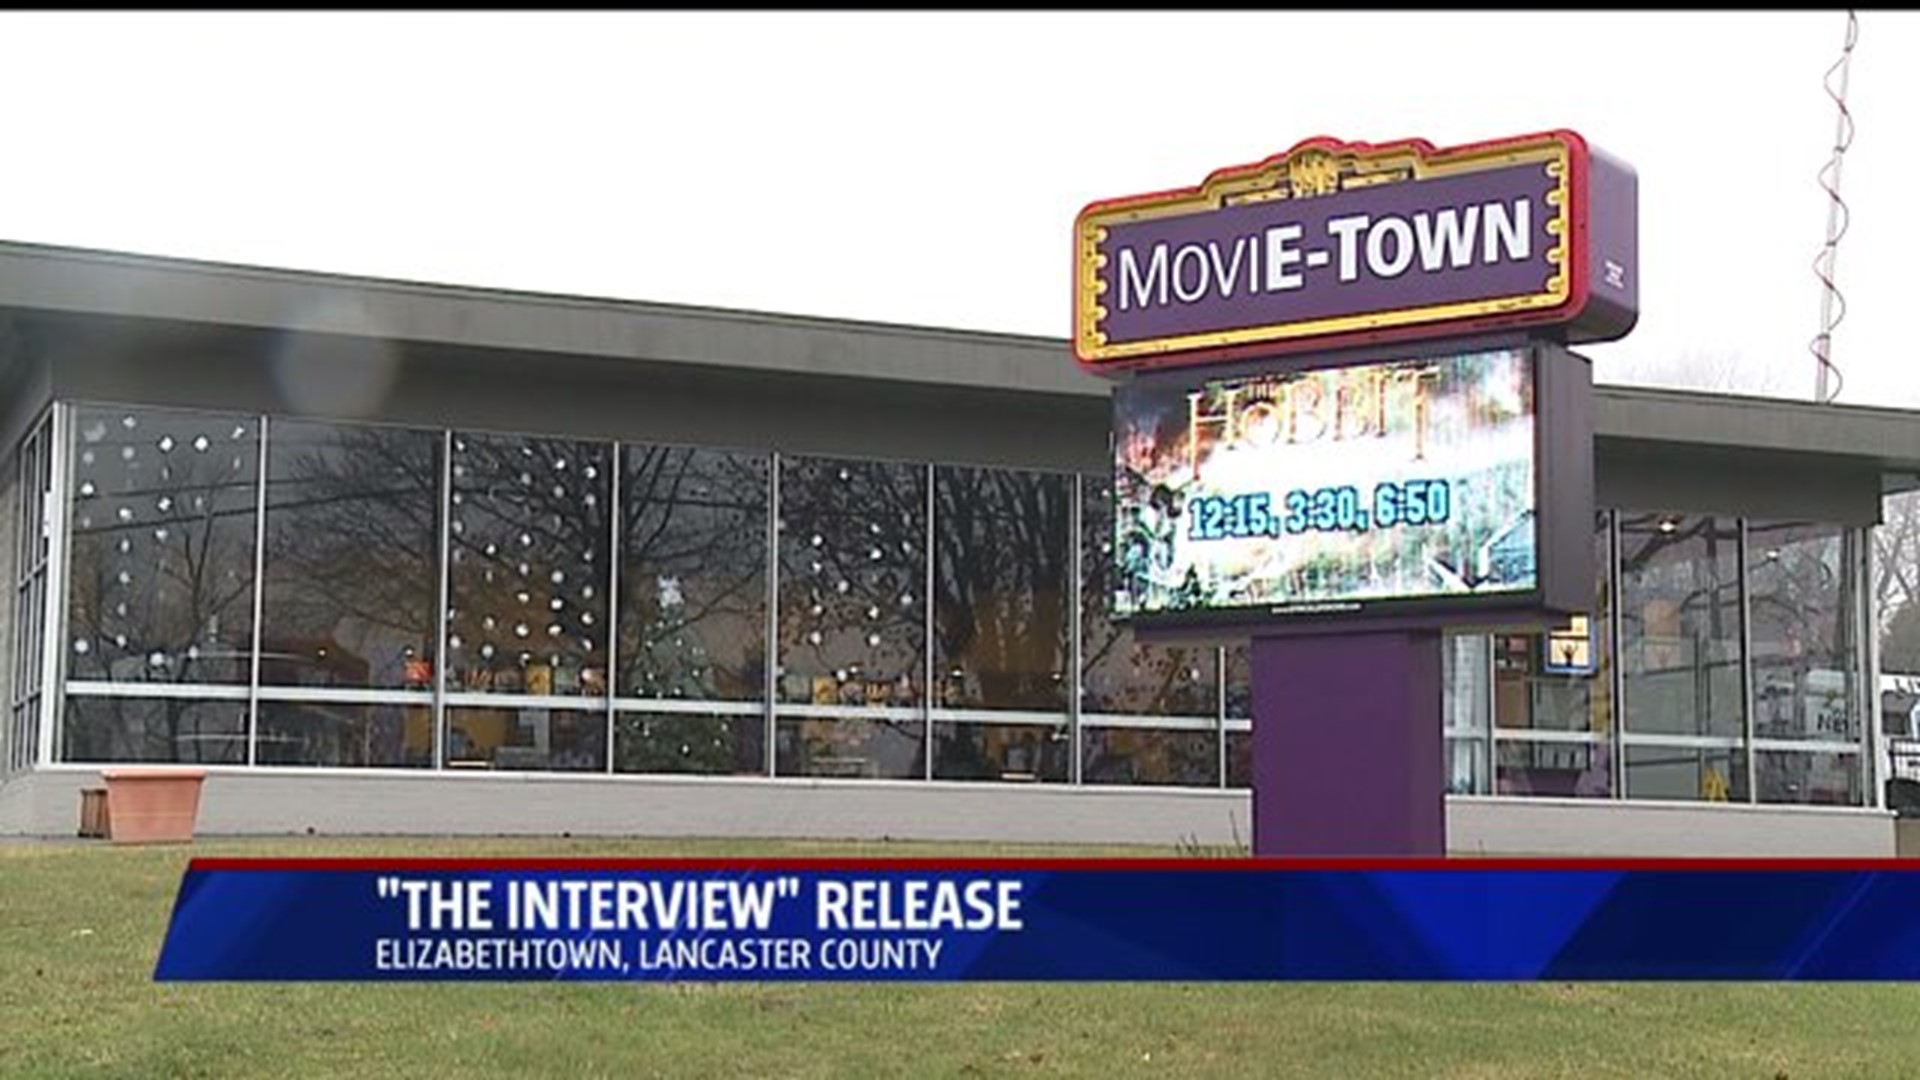 "The Interview" at Movie-Town in Elizabethtown but has cancelled